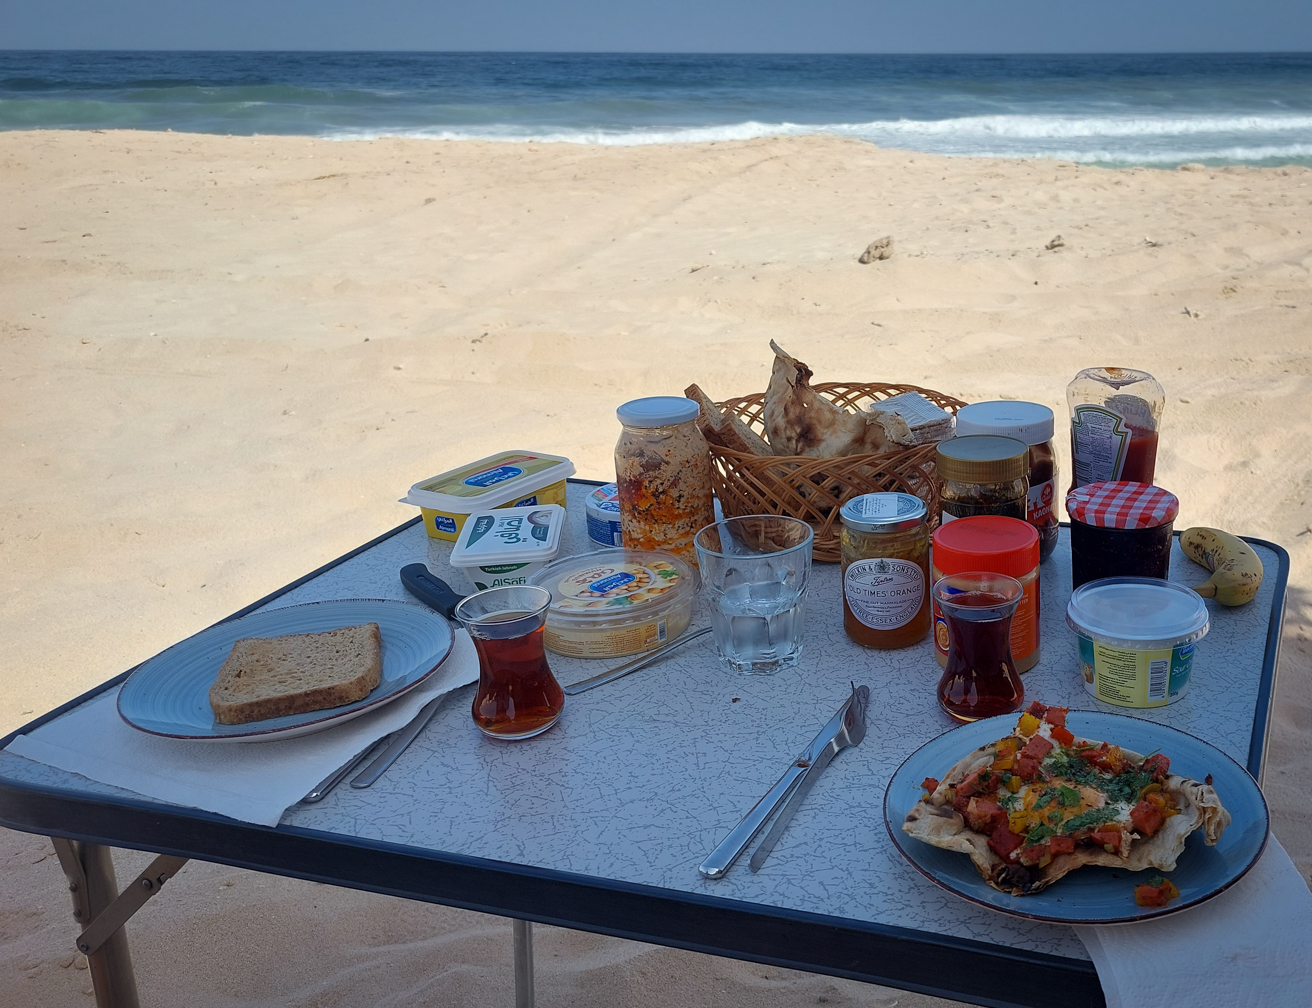 <span  class="uc_style_uc_tiles_grid_image_elementor_uc_items_attribute_title" style="color:#ffffff;">Breakfast at the beach</span>